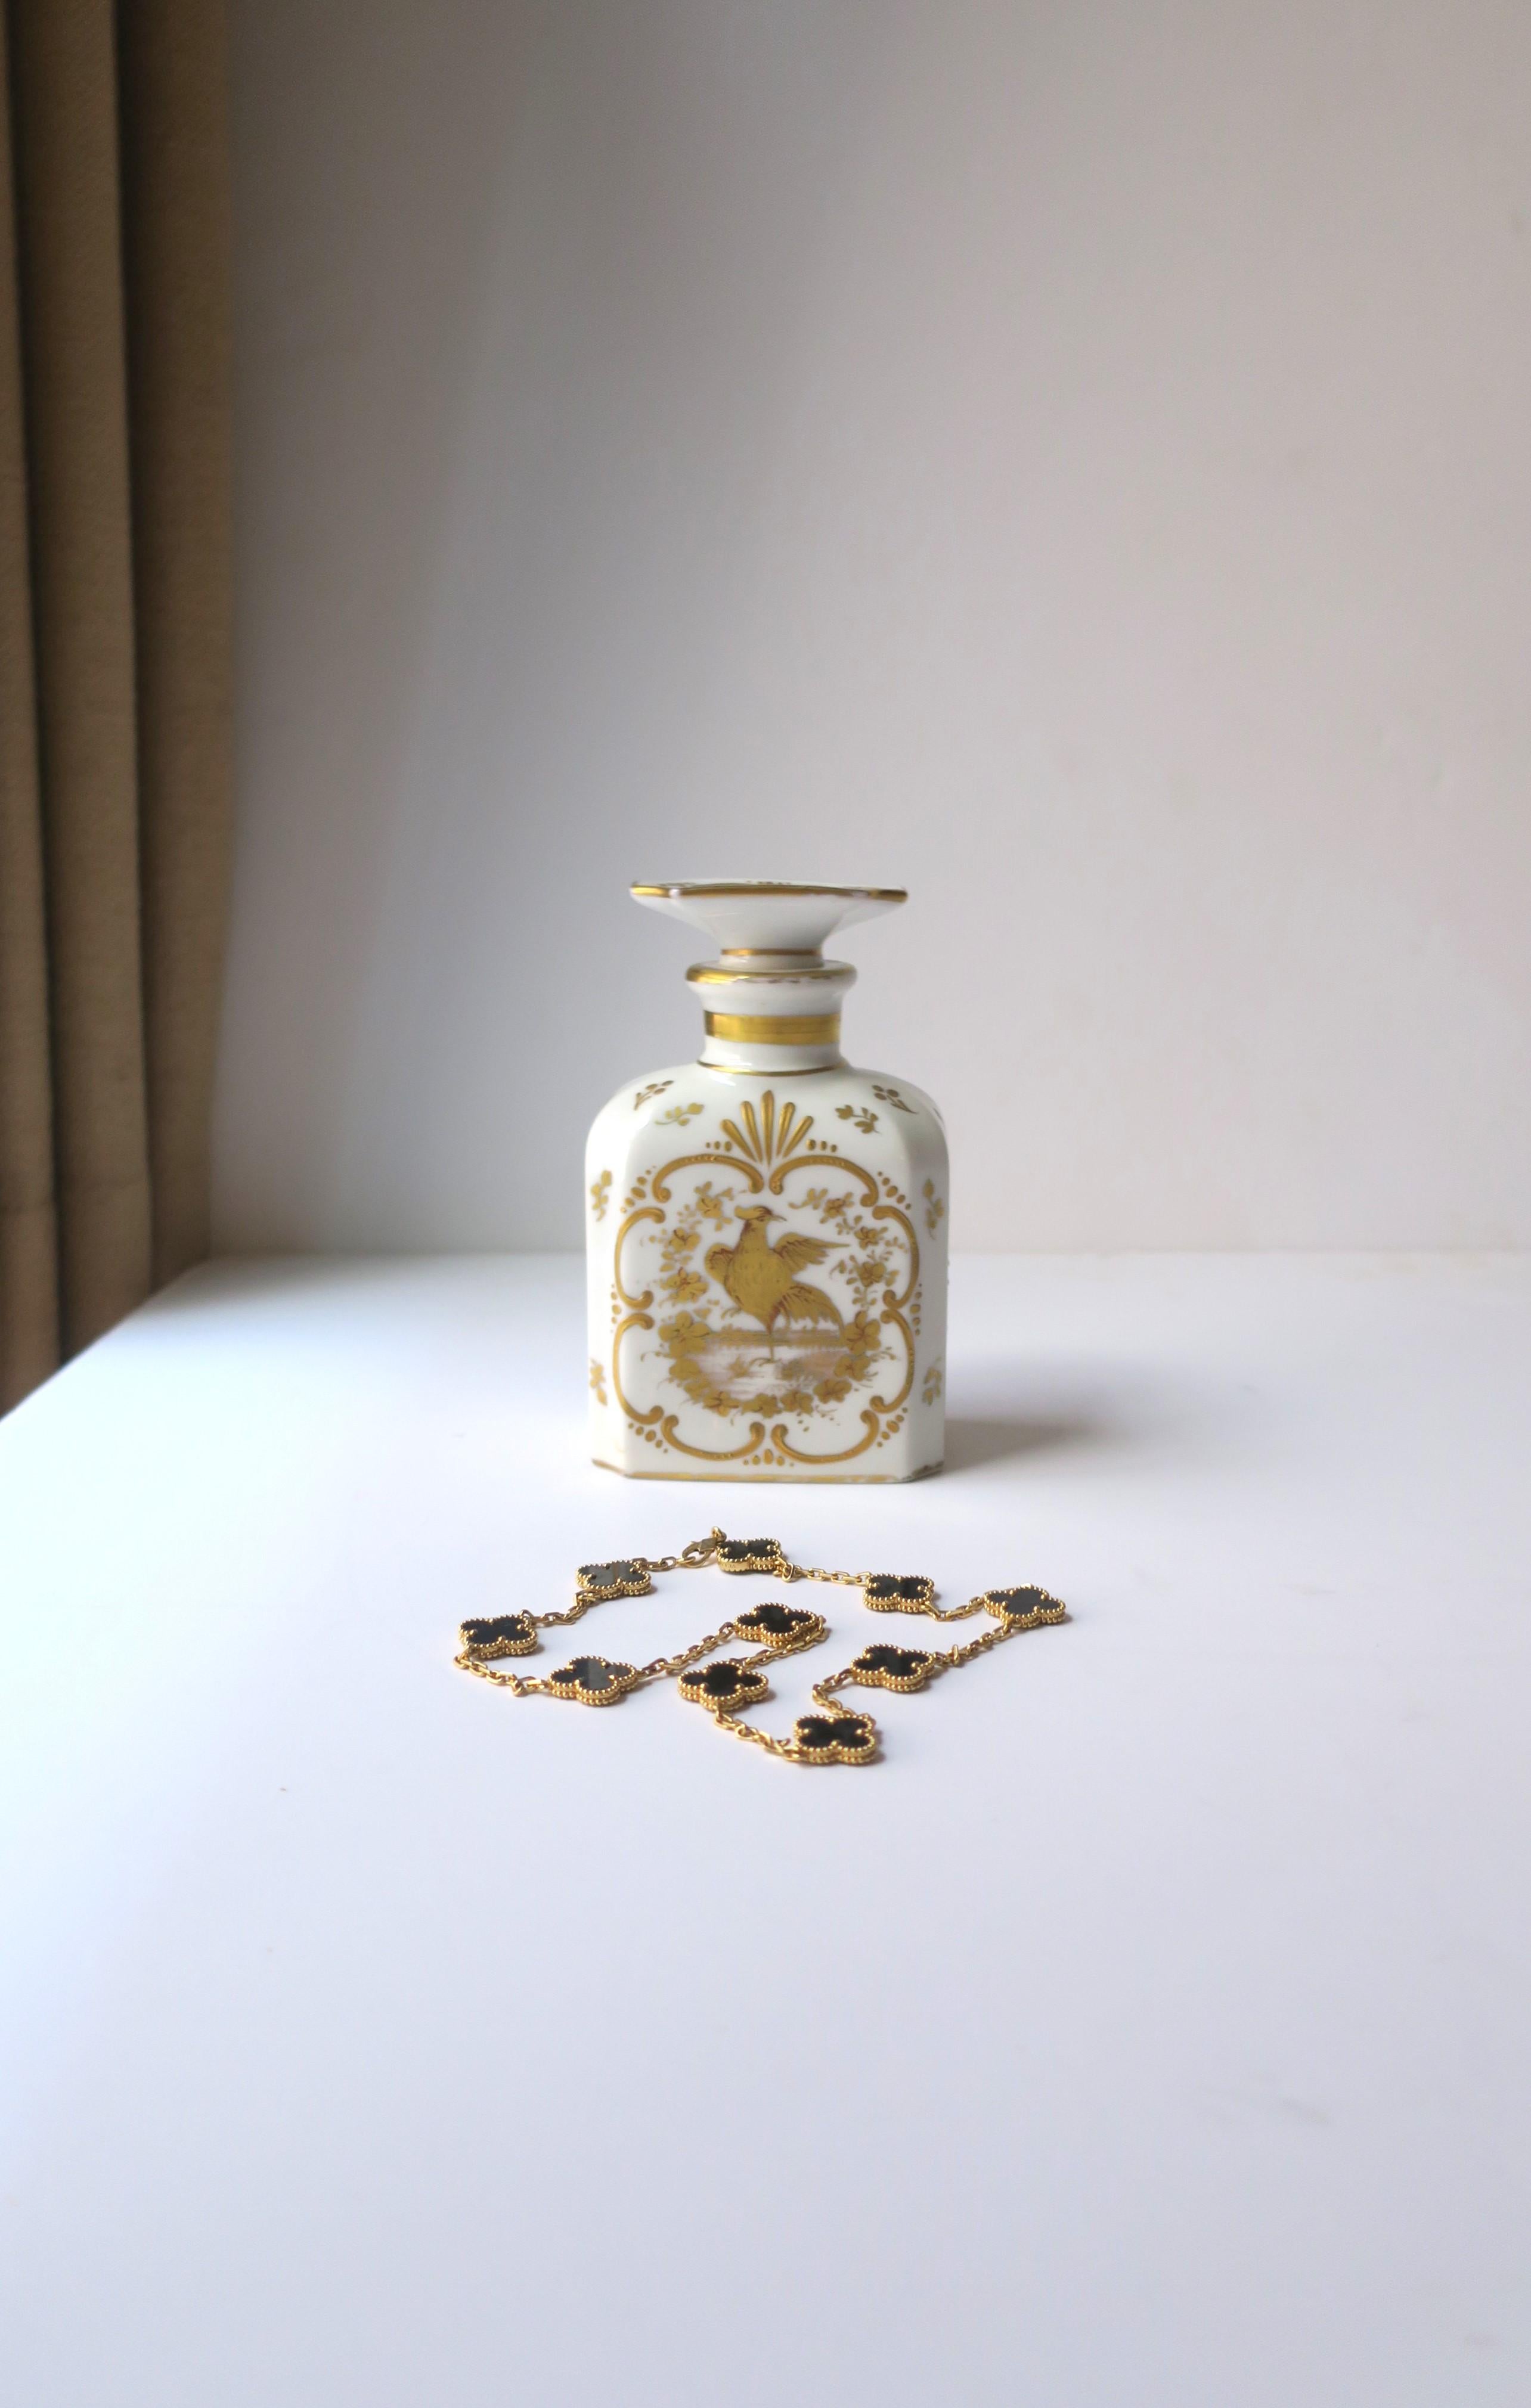 Italian White and Gold Porcelain Vanity Bottle with Bird Design Rococo Style In Good Condition For Sale In New York, NY